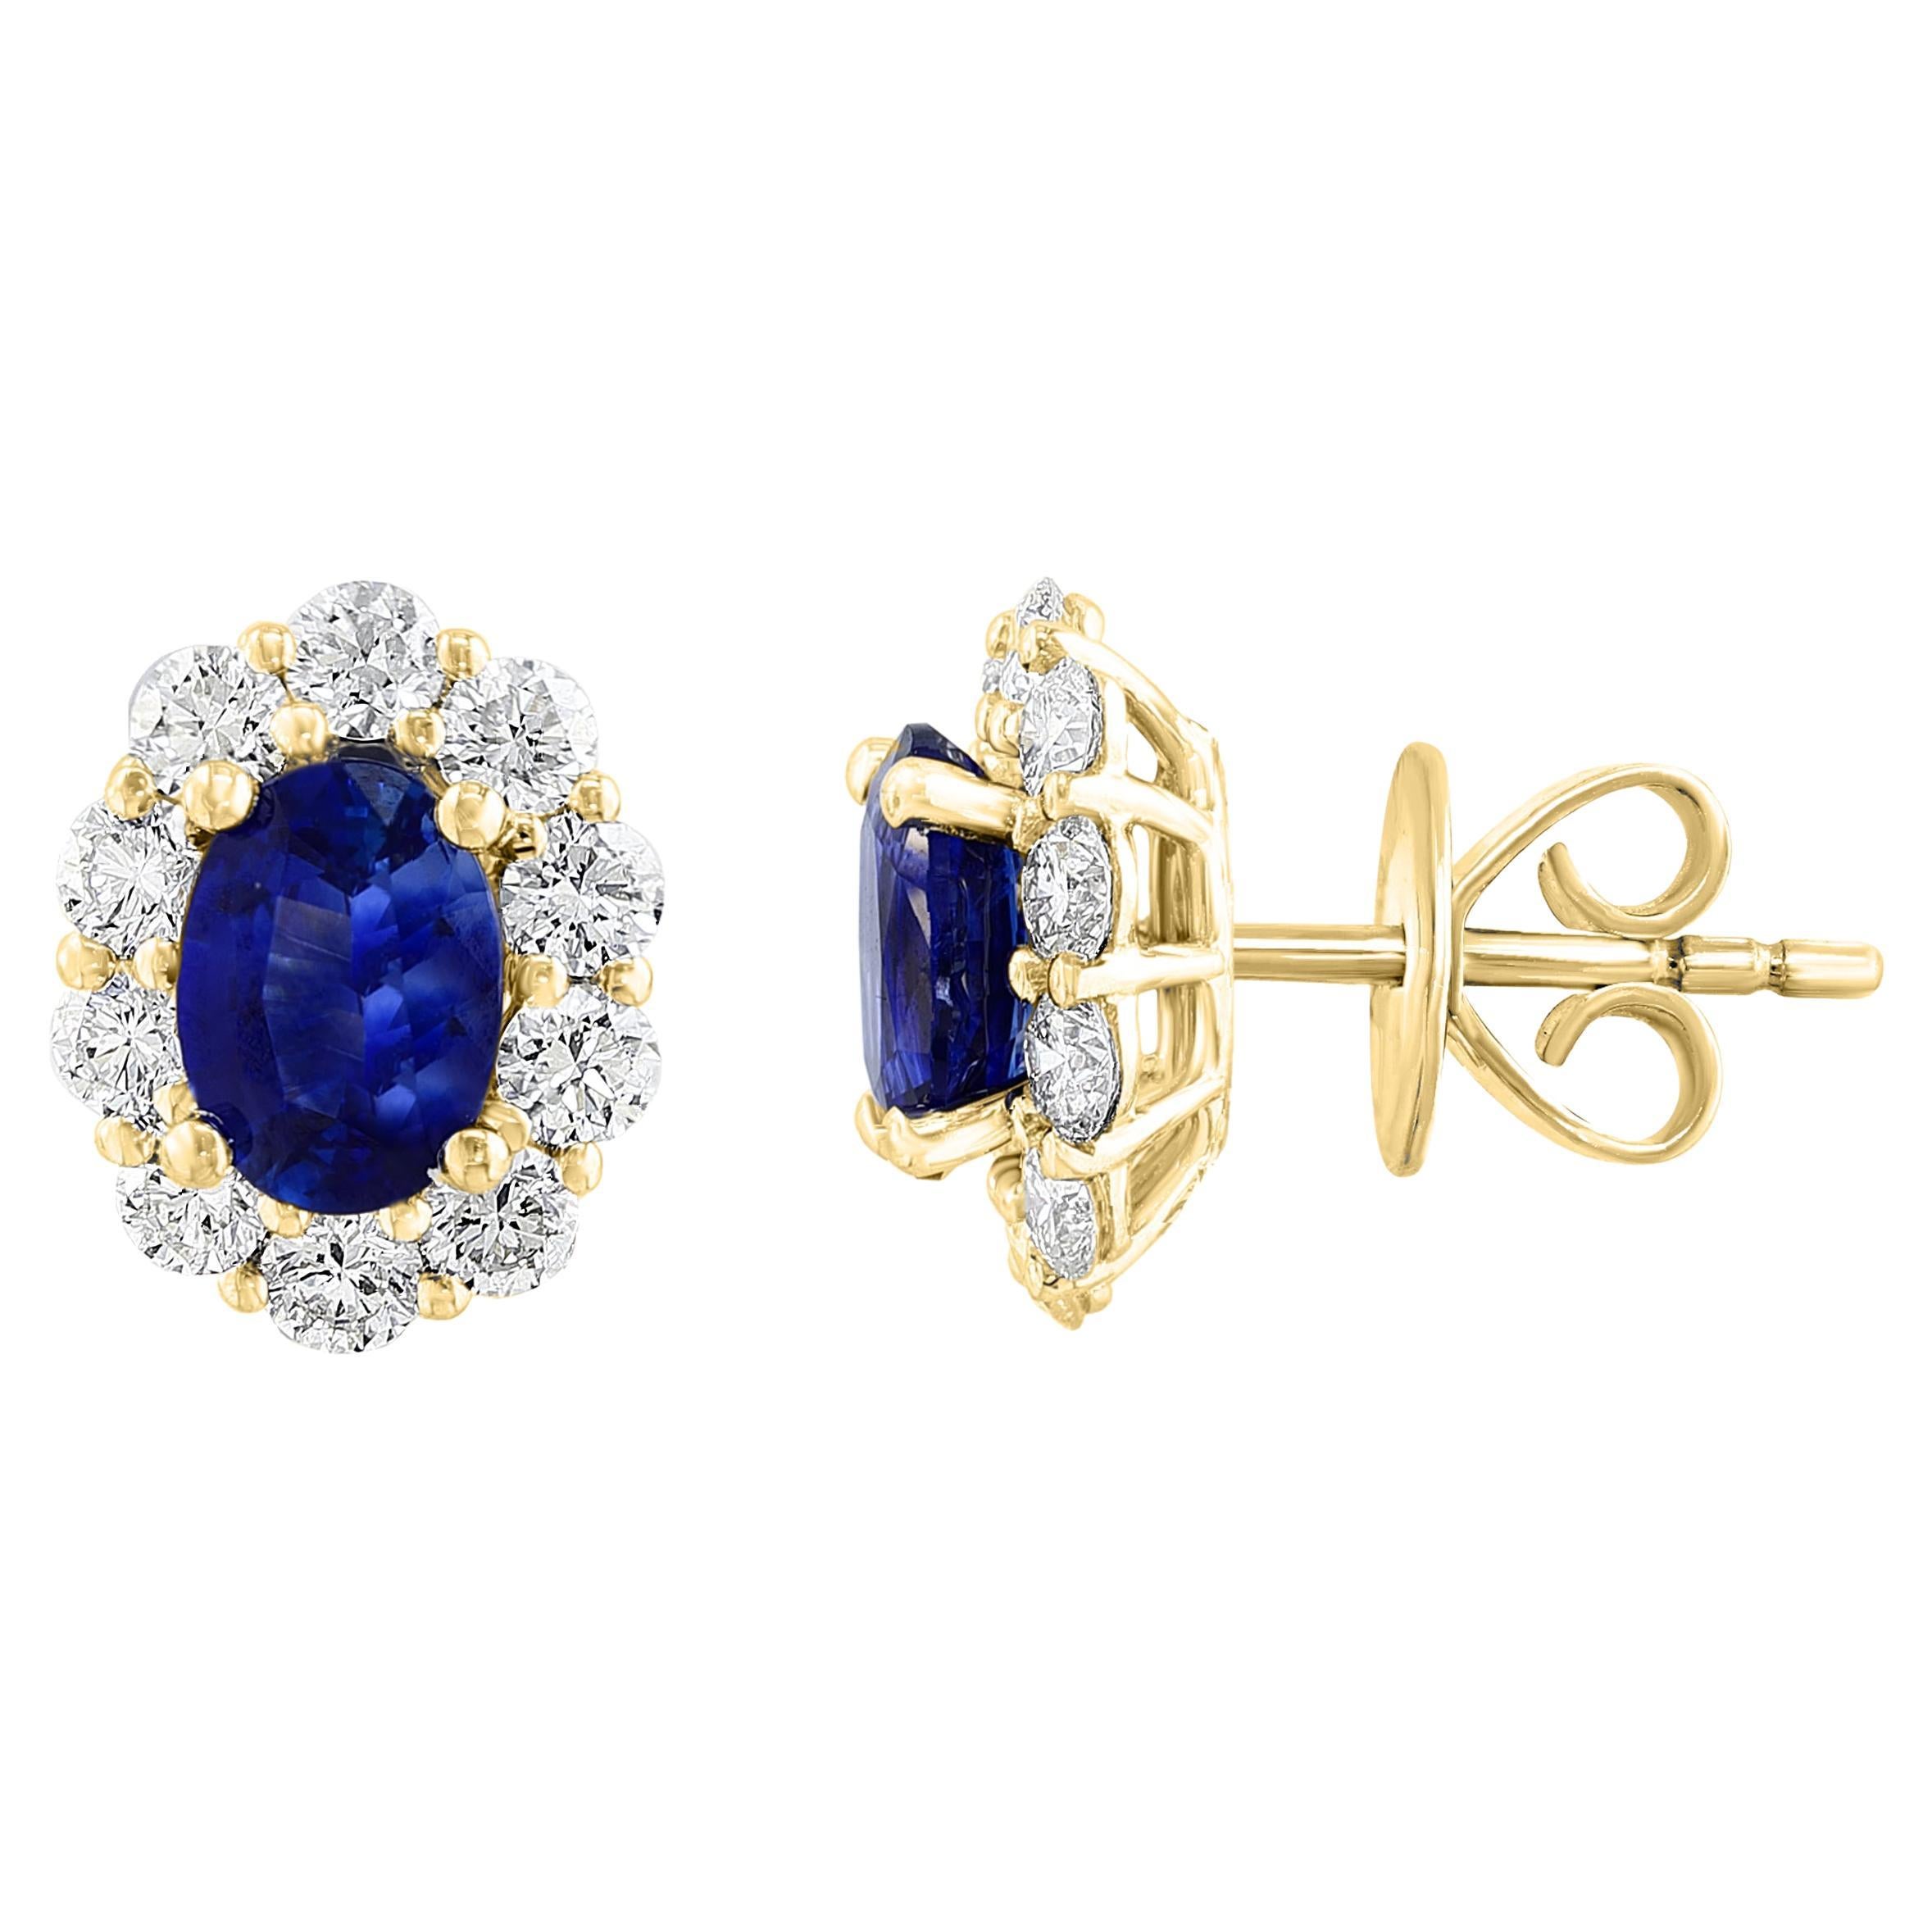 1.60 Carat Oval Cut Sapphire and Diamond Stud Earrings in 18K Yellow Gold